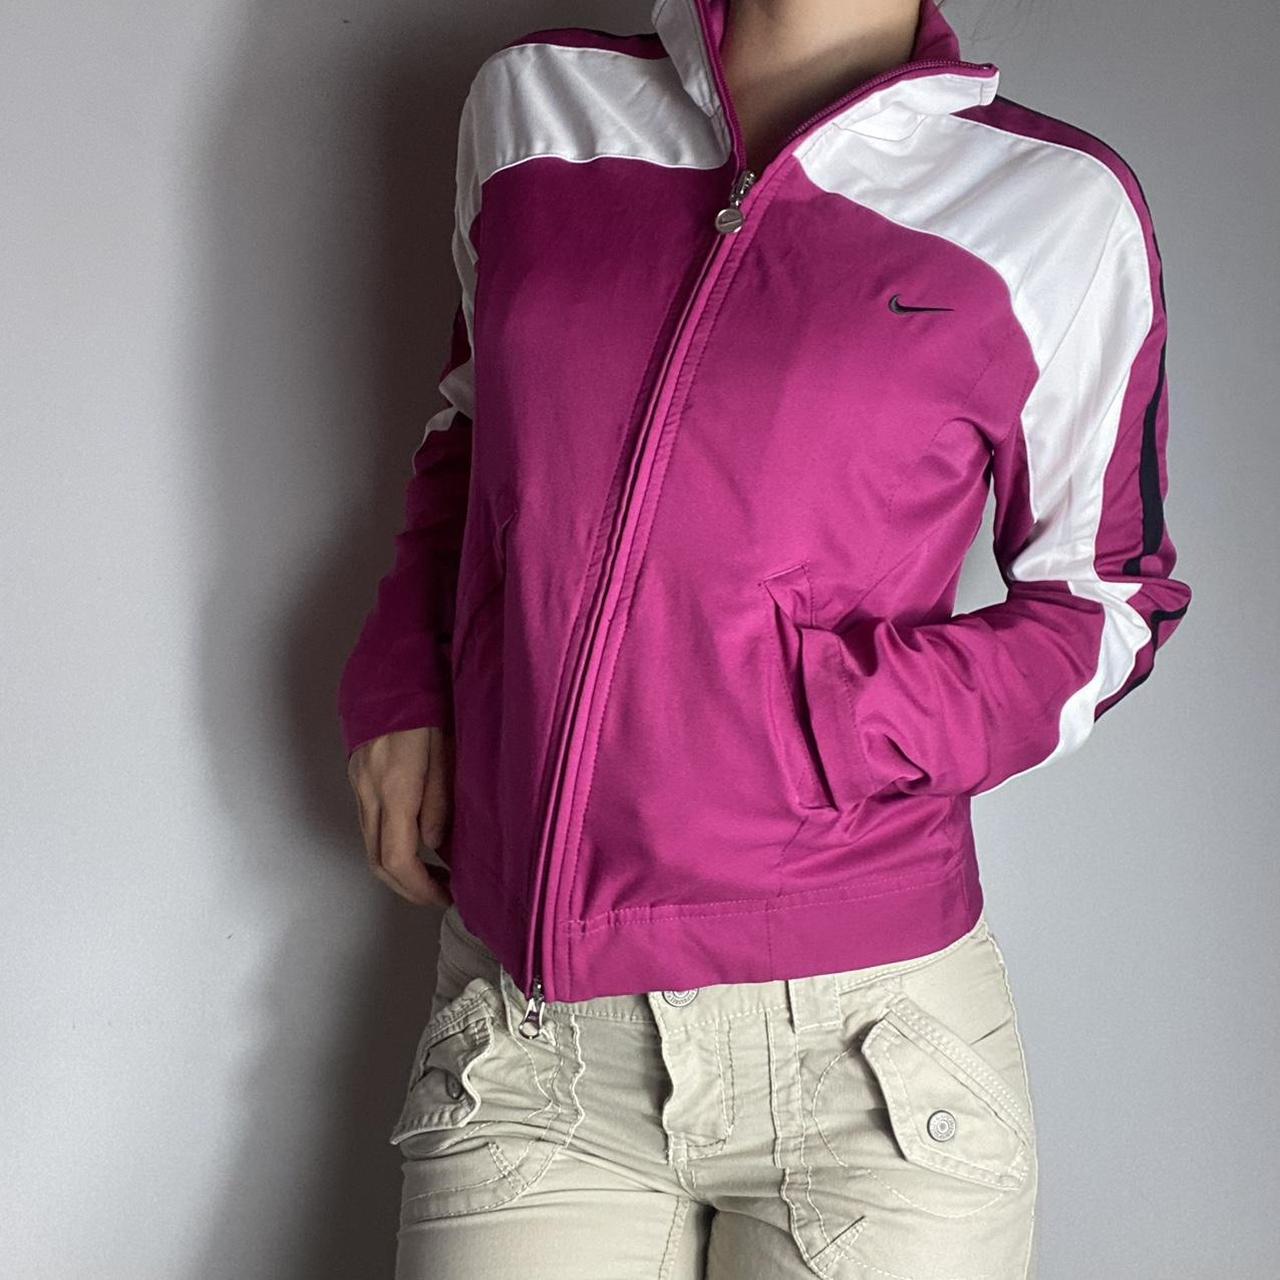 Nike Women's Pink and White Jacket (3)